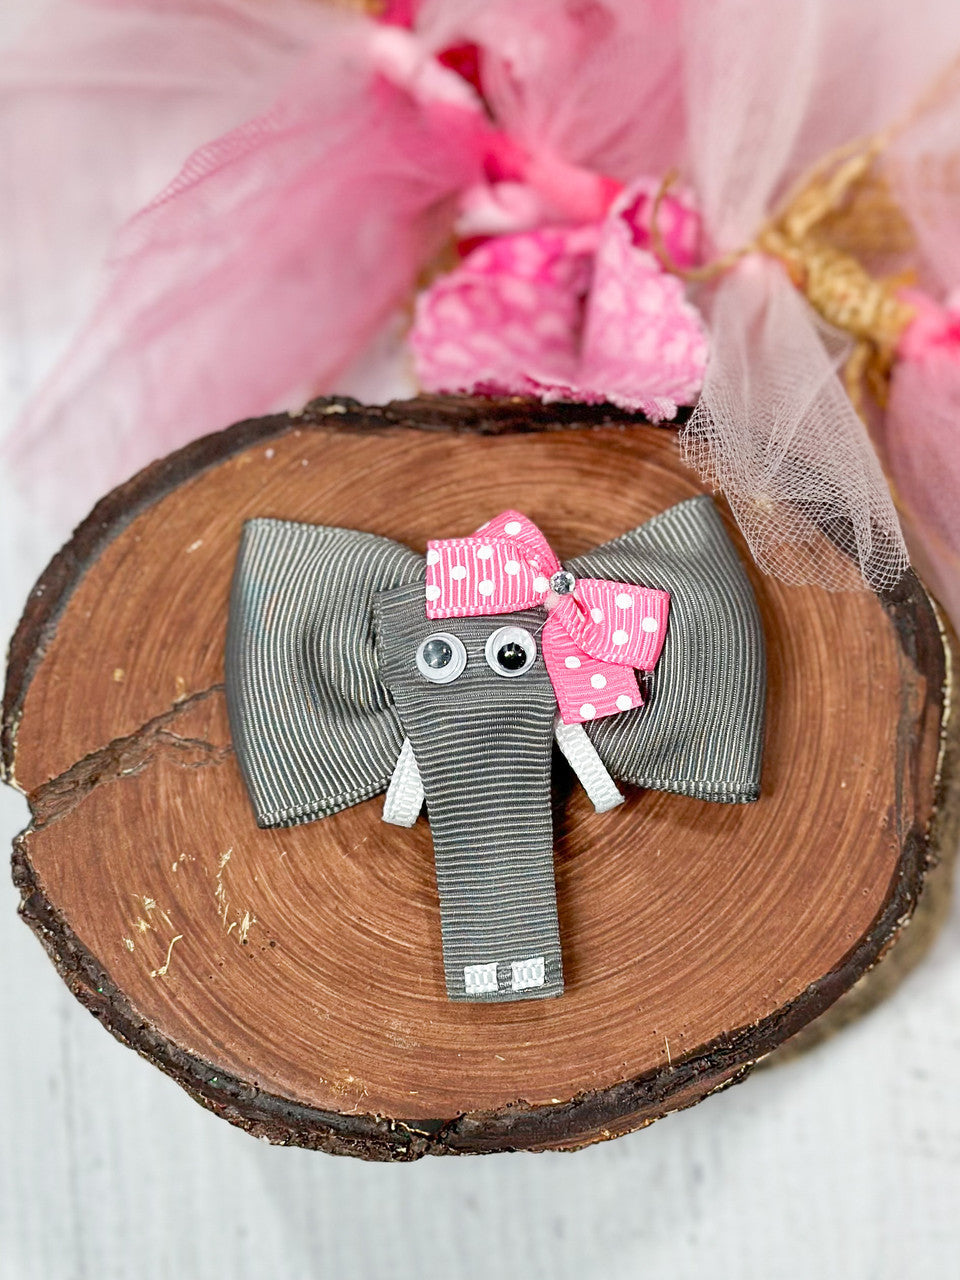 Elephant Clippie made of grosgrain ribbon and googly eyes